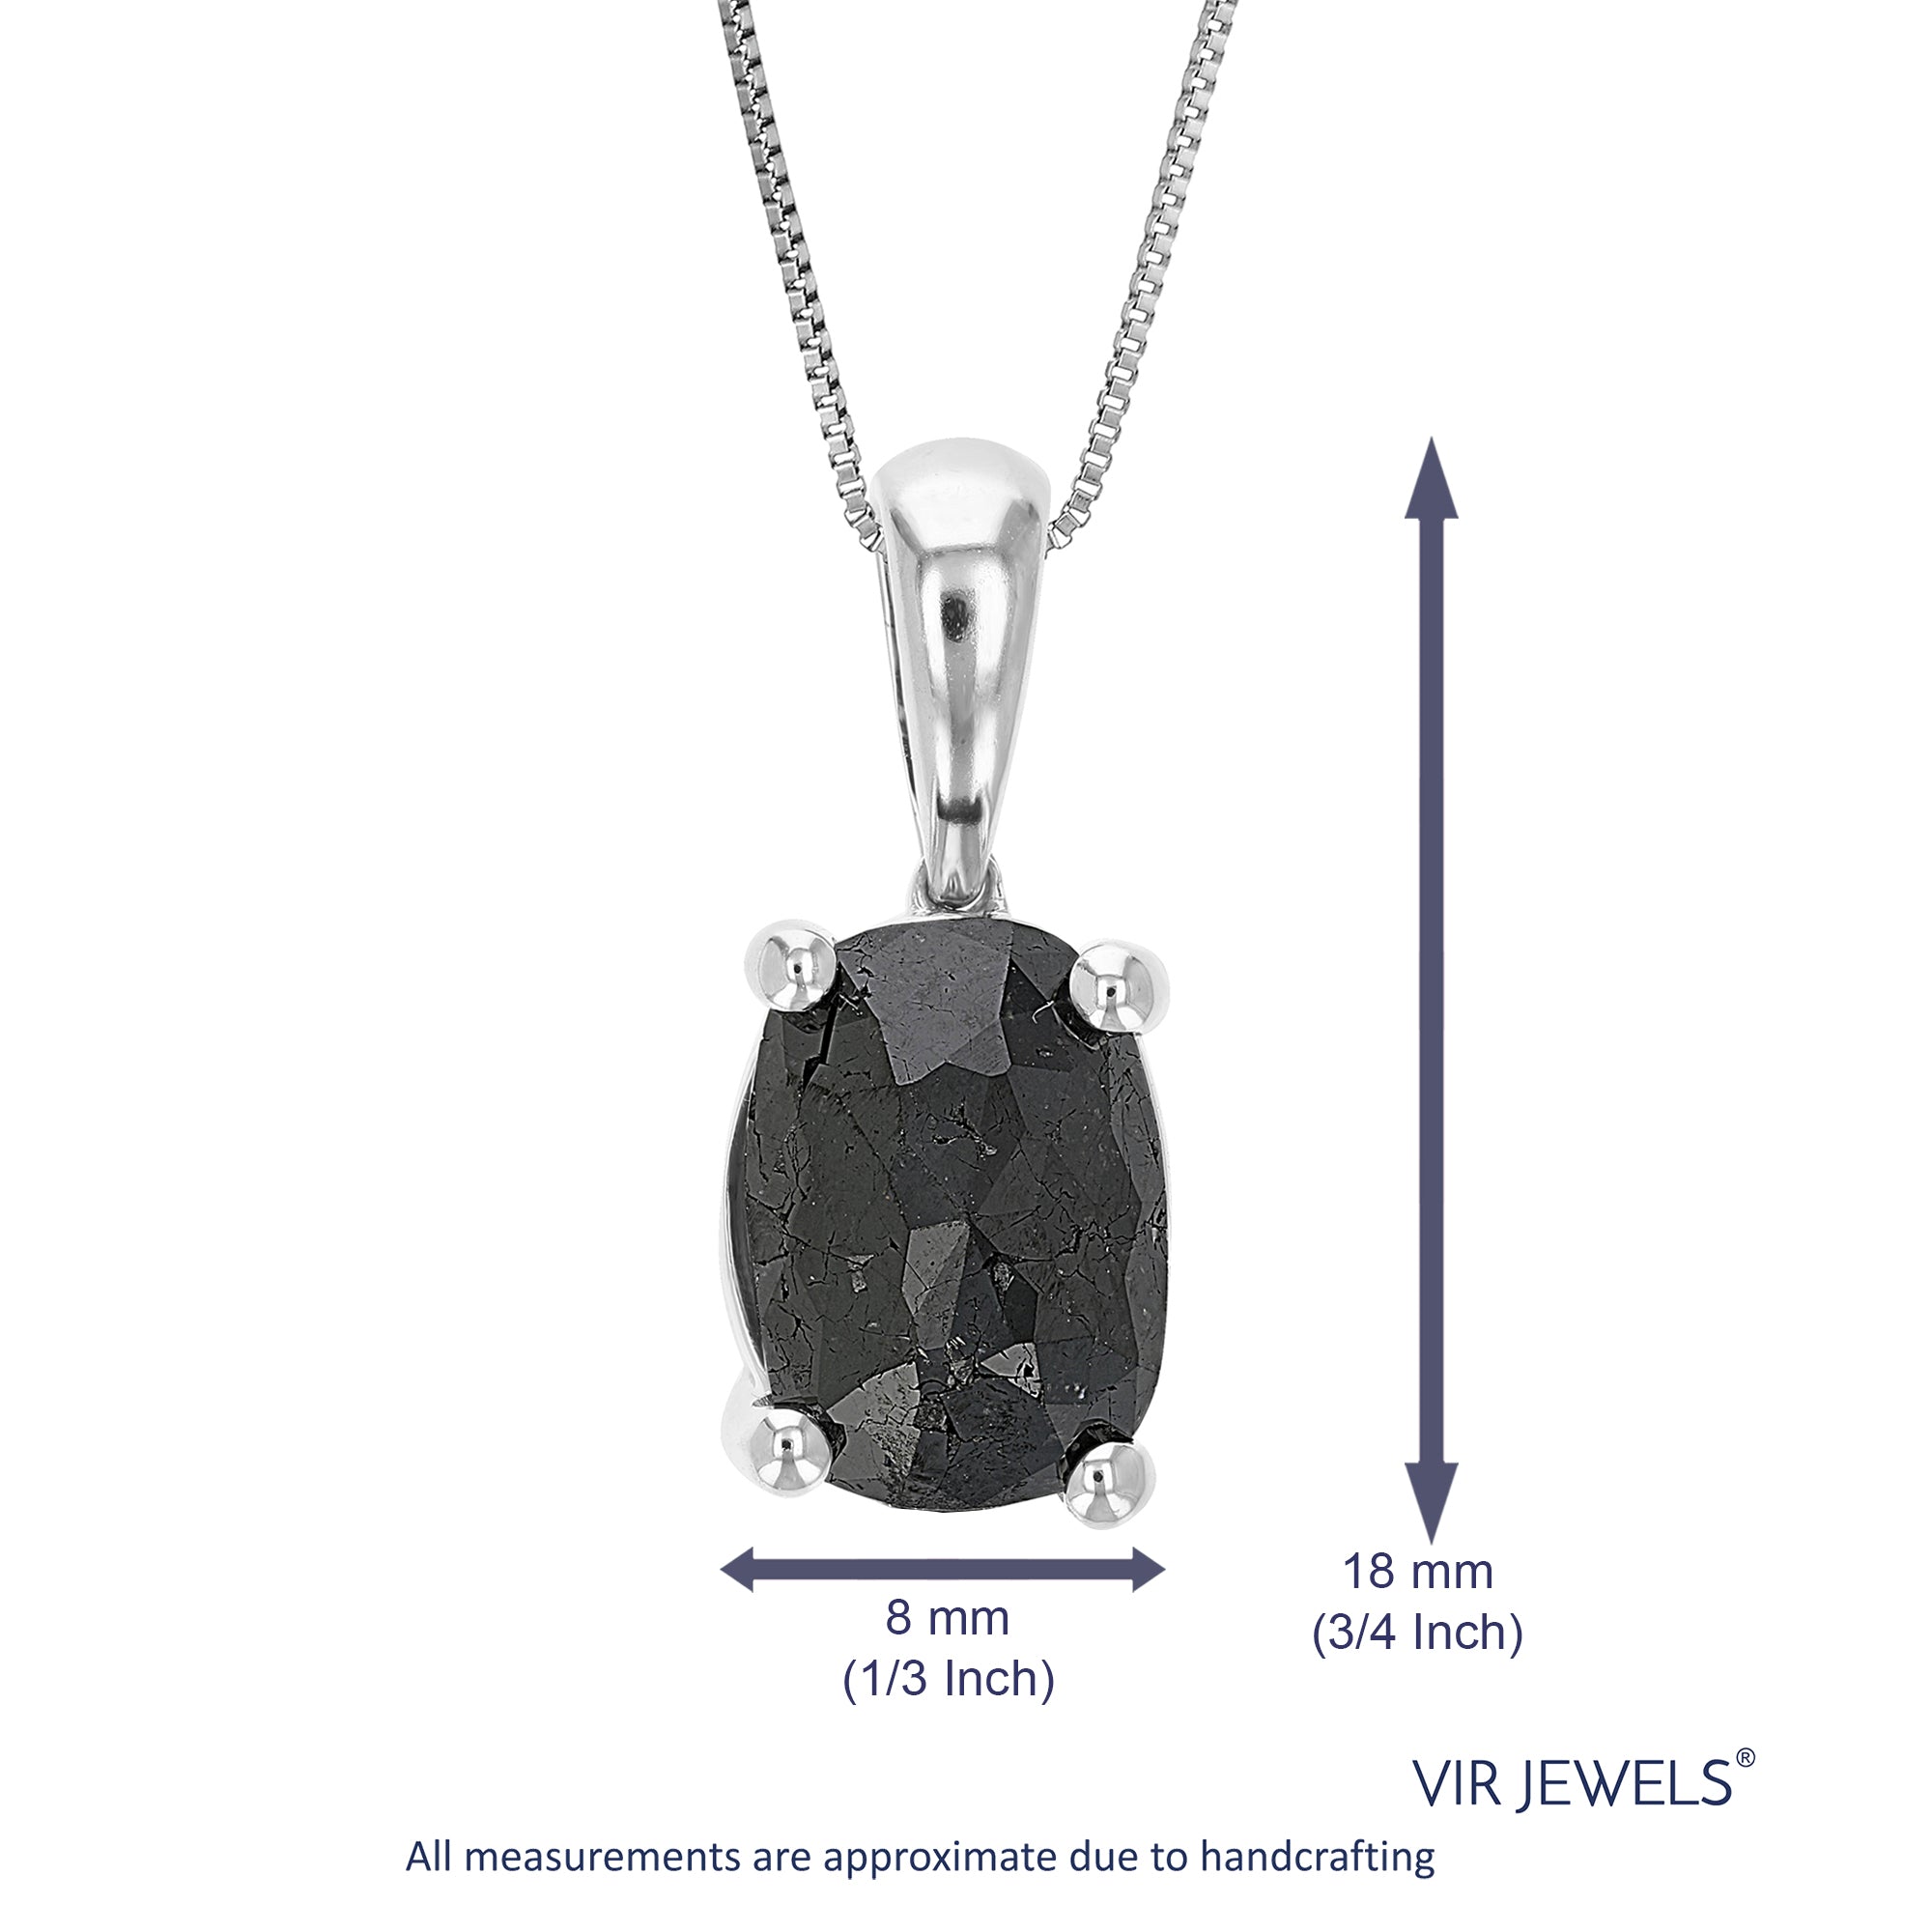 2 cttw Diamond Pendant, Black Diamond Oval Shape Pendant Necklace for Women in .925 Sterling Silver with 18 Inch Chain, Prong Setting